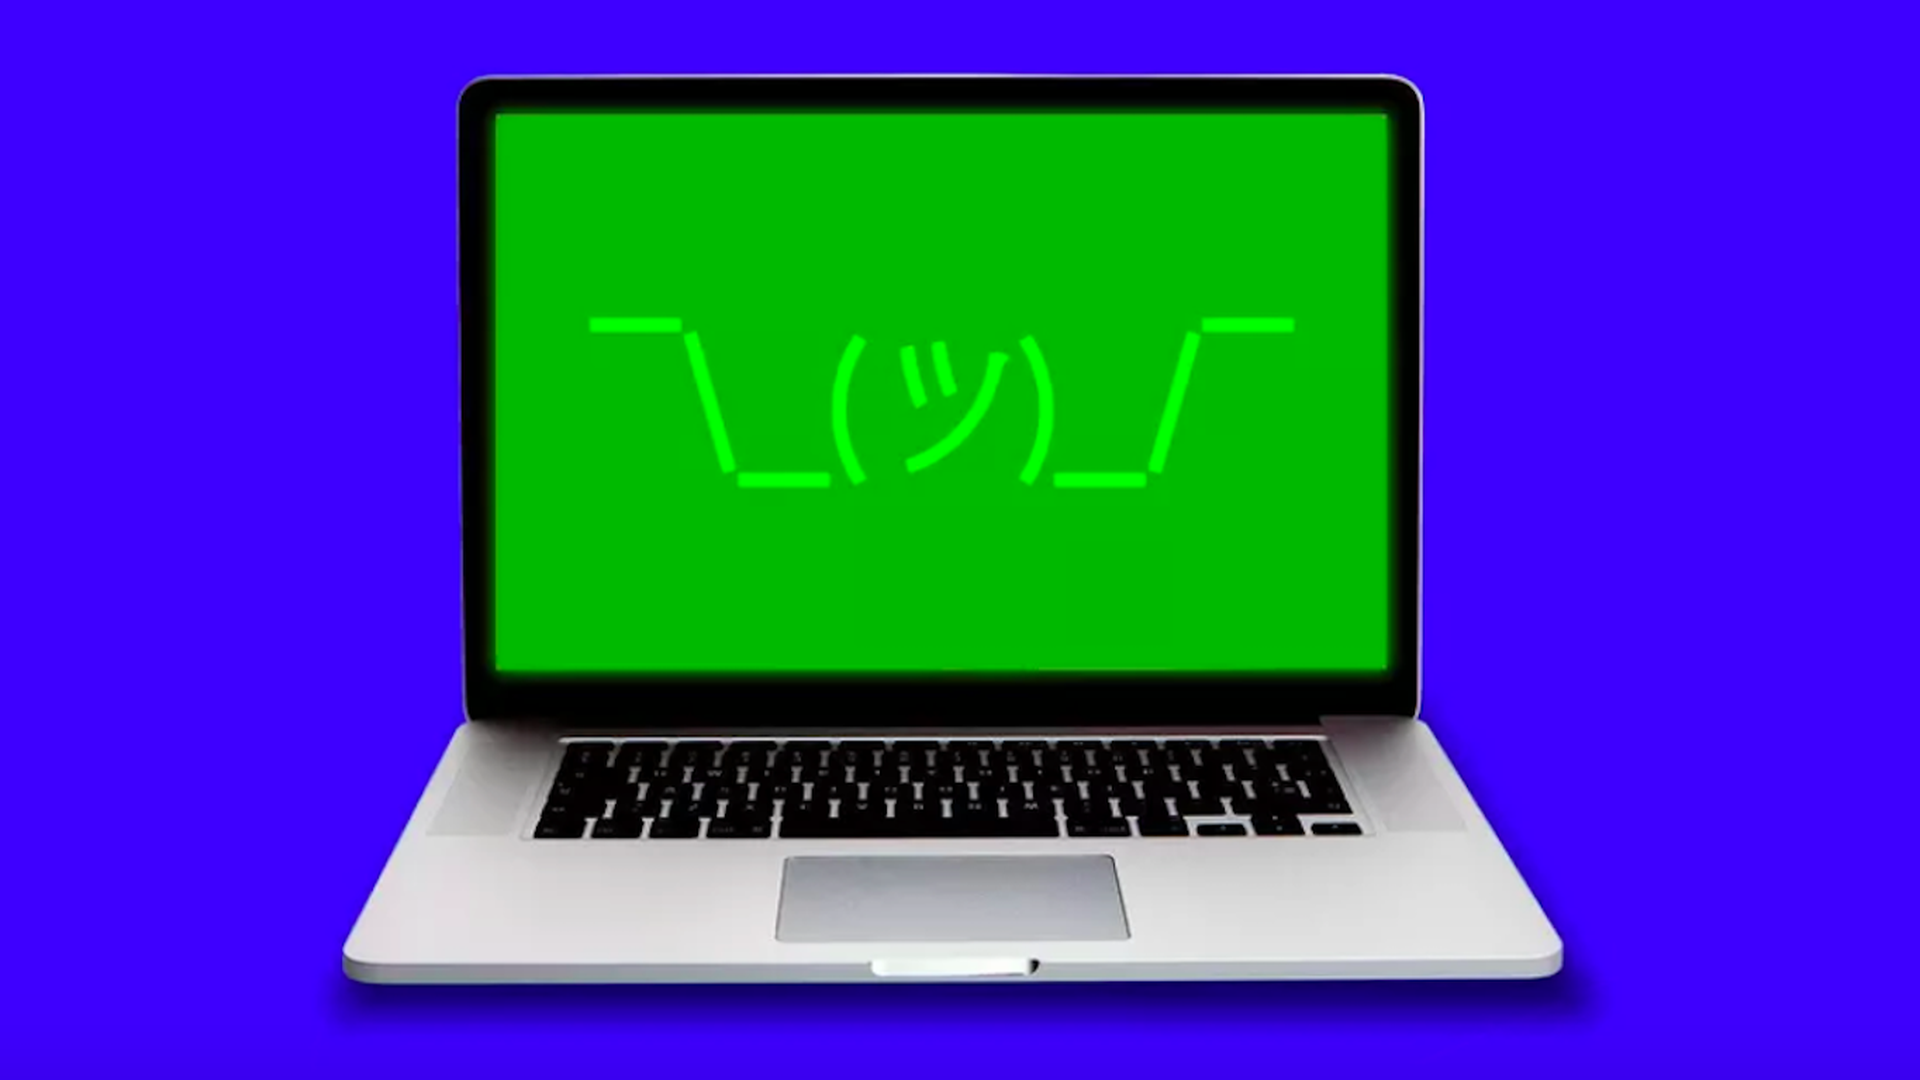 A laptop with a shrugging emoji on the screen